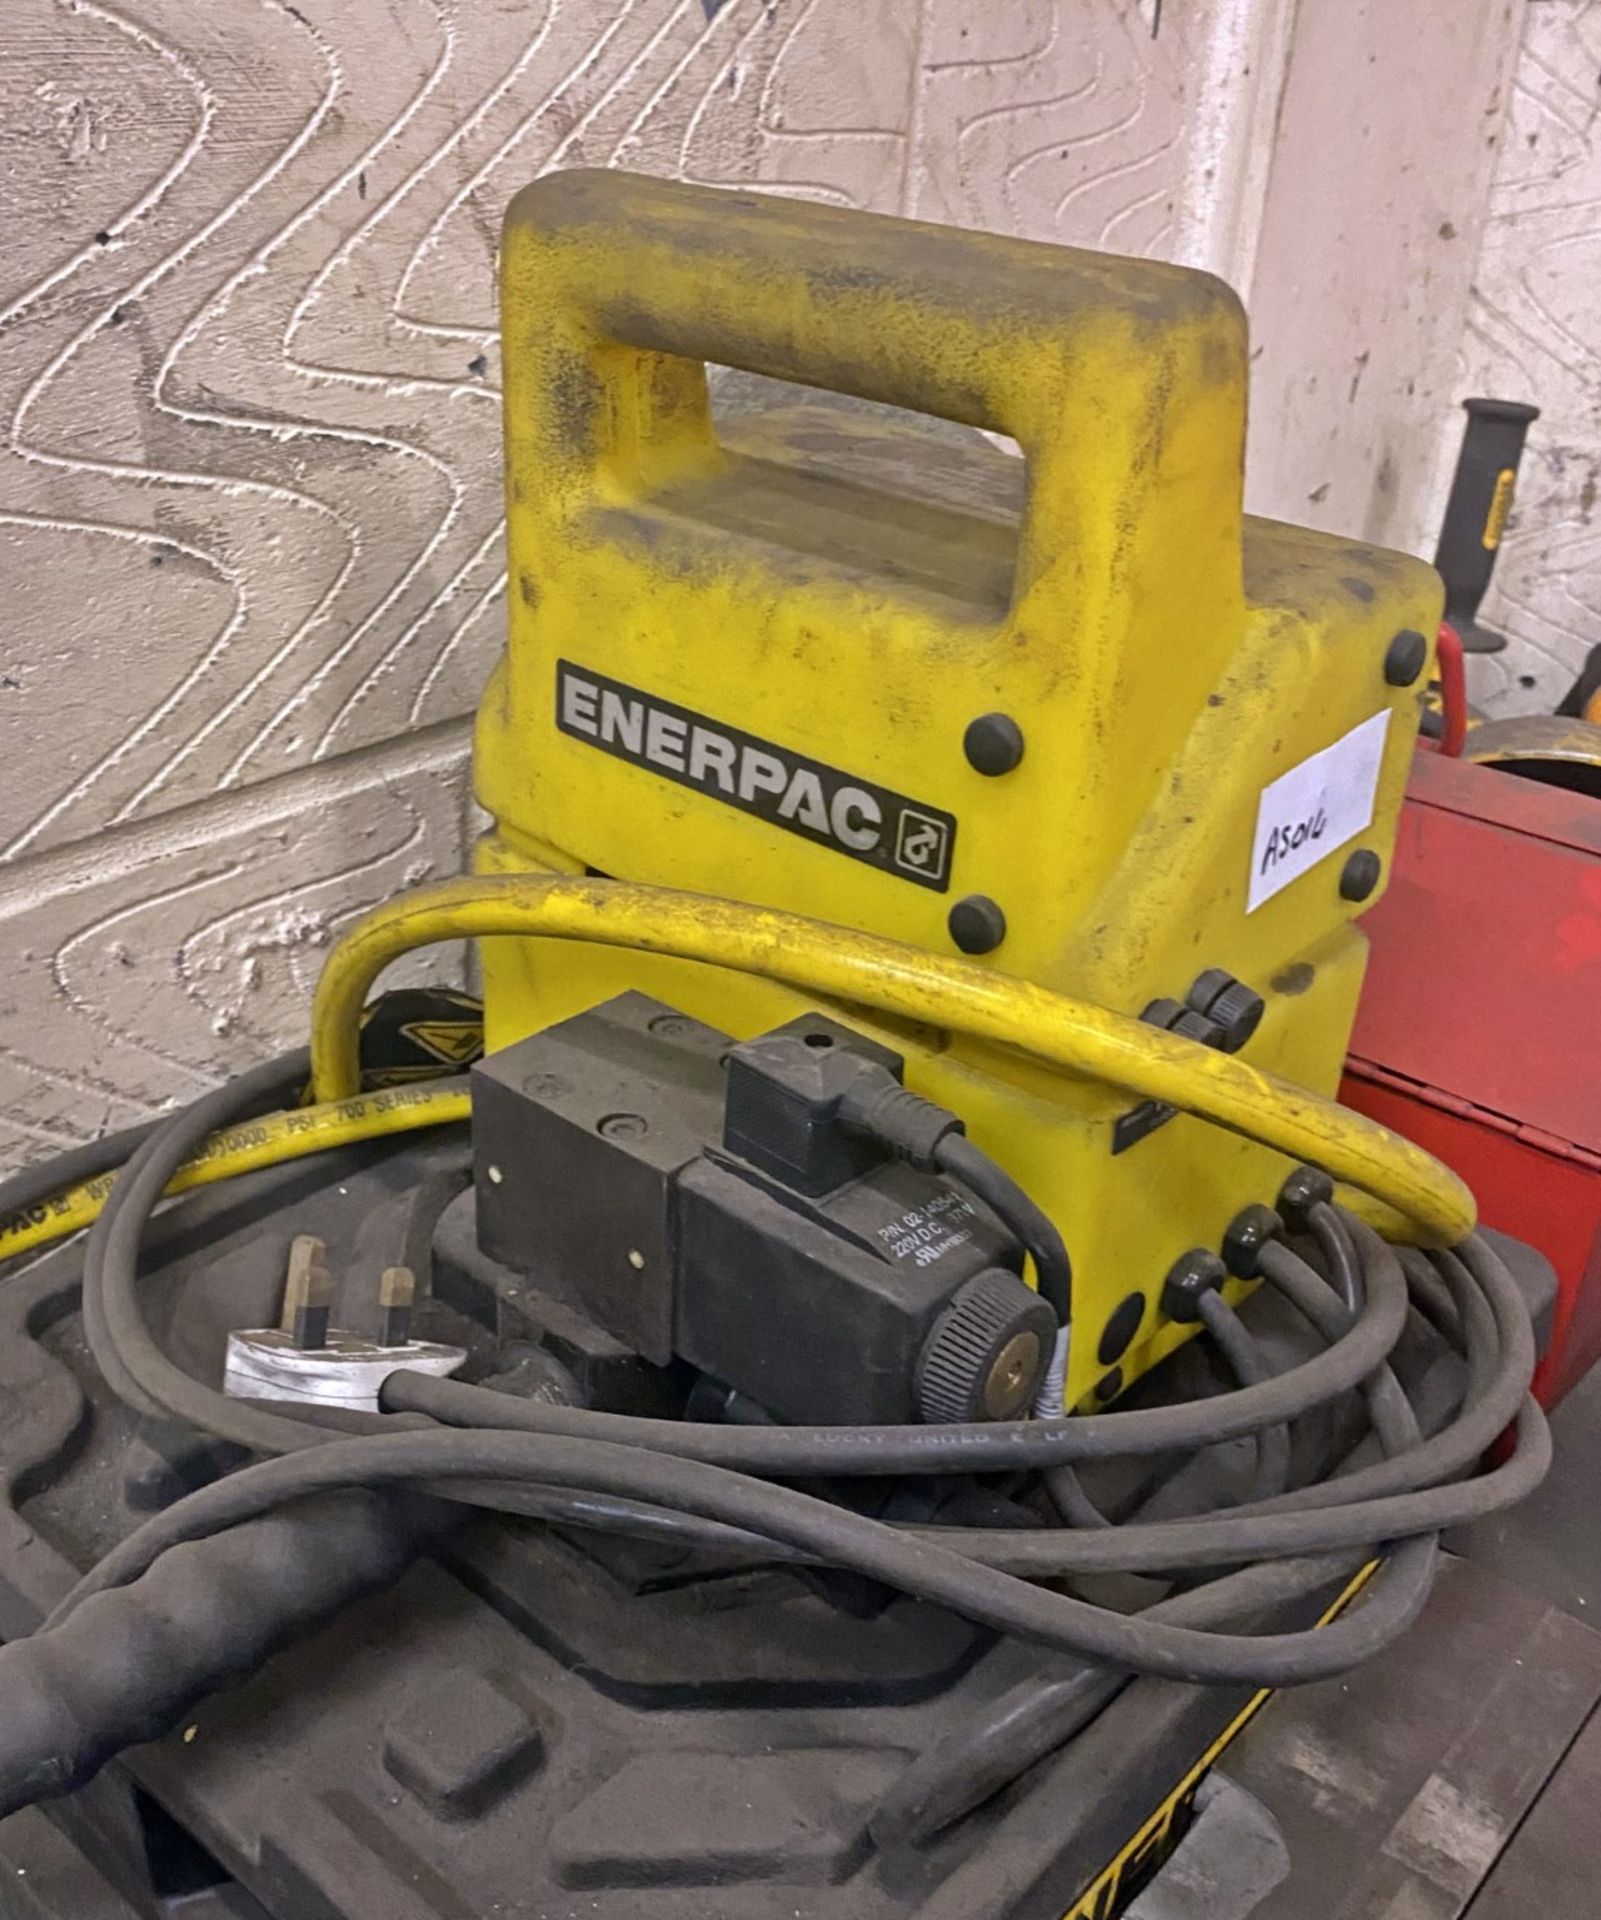 1 x Electric Spring Making Tool by Enerpac - Mounted on an Enerpac Bench